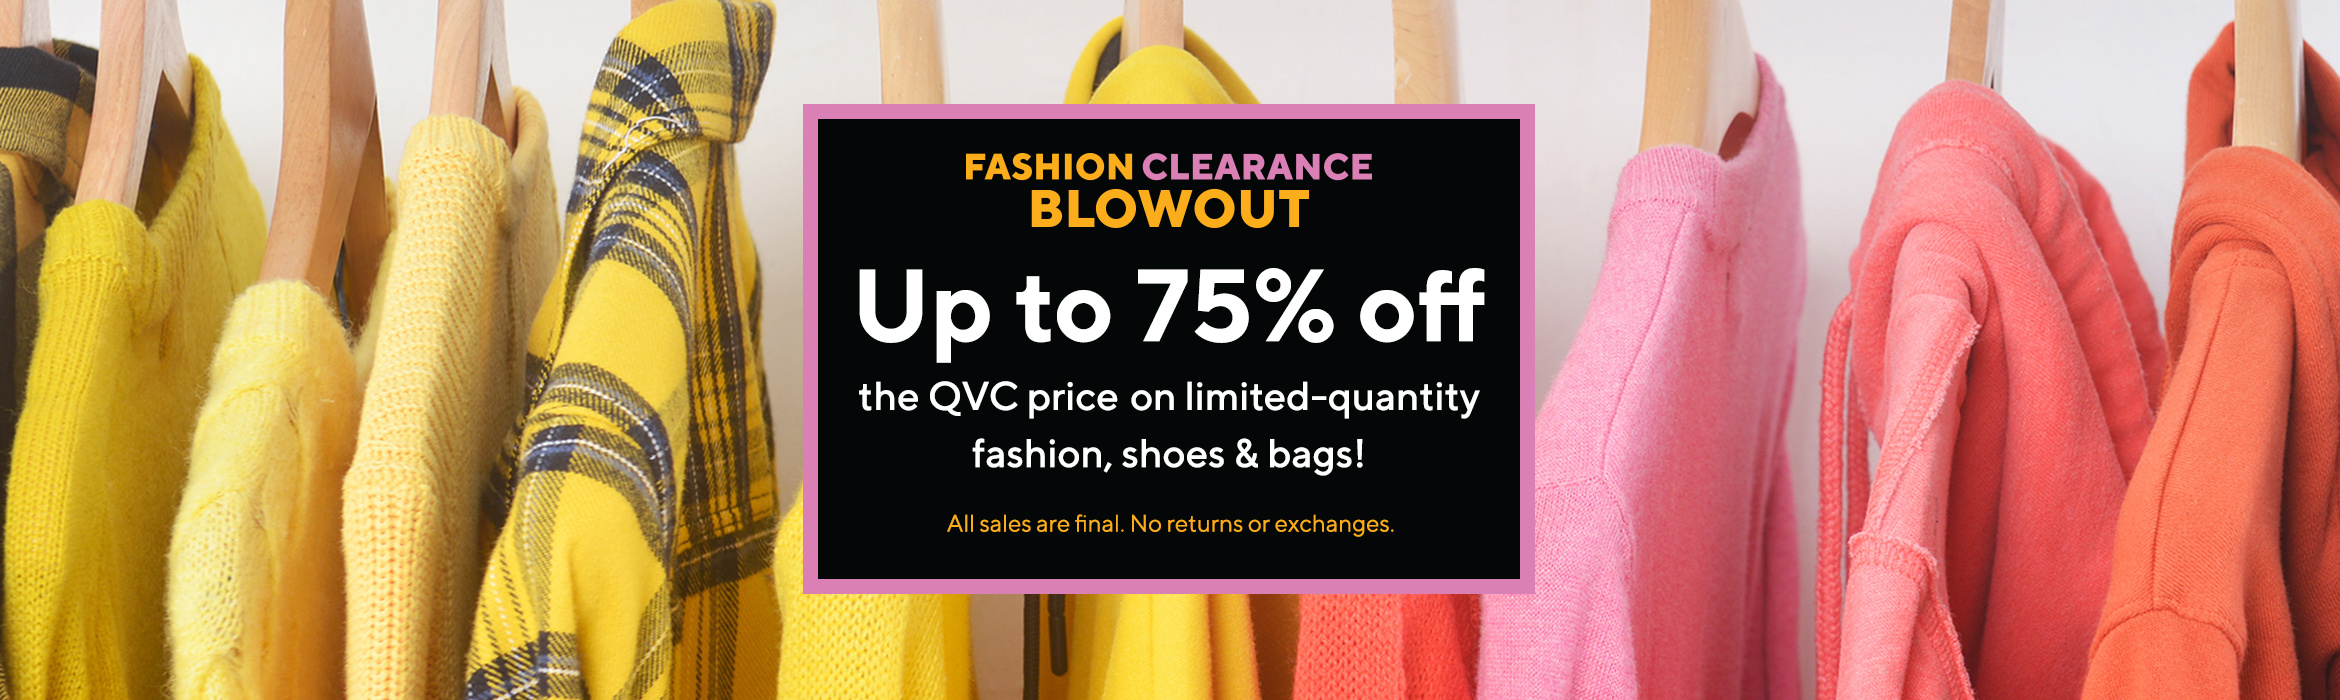 Fashion Clearance Blowout Up to 75% off the QVC price on limited-quantity fashion, shoes & bags!